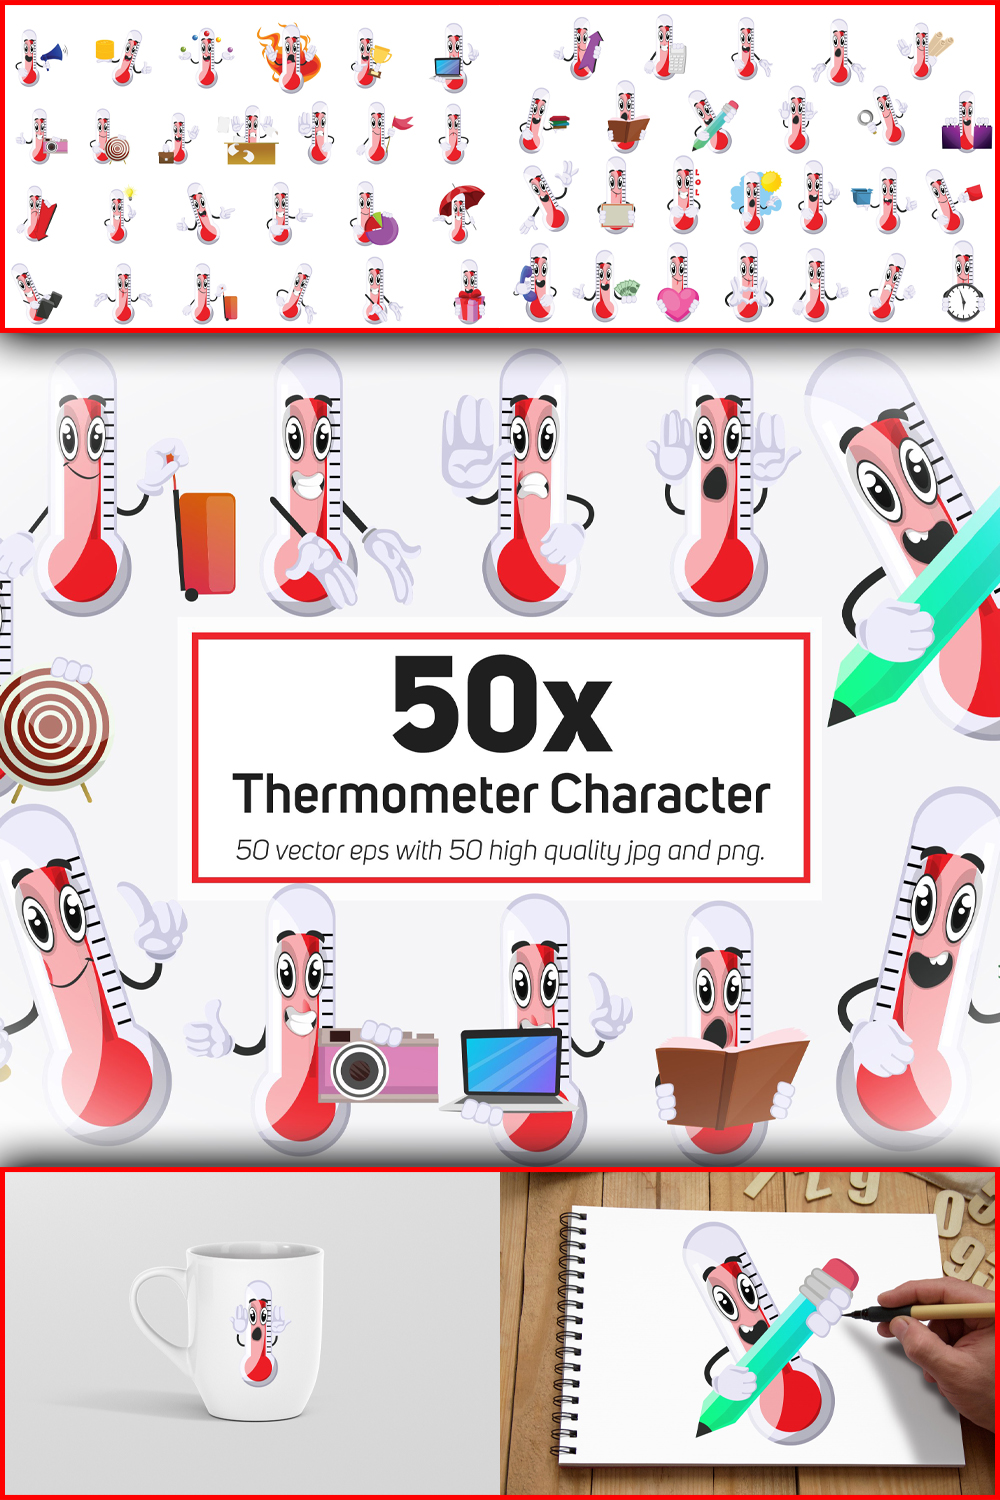 545303 50x thermometer character or mascot collection ill pinterest 1000 1500 548